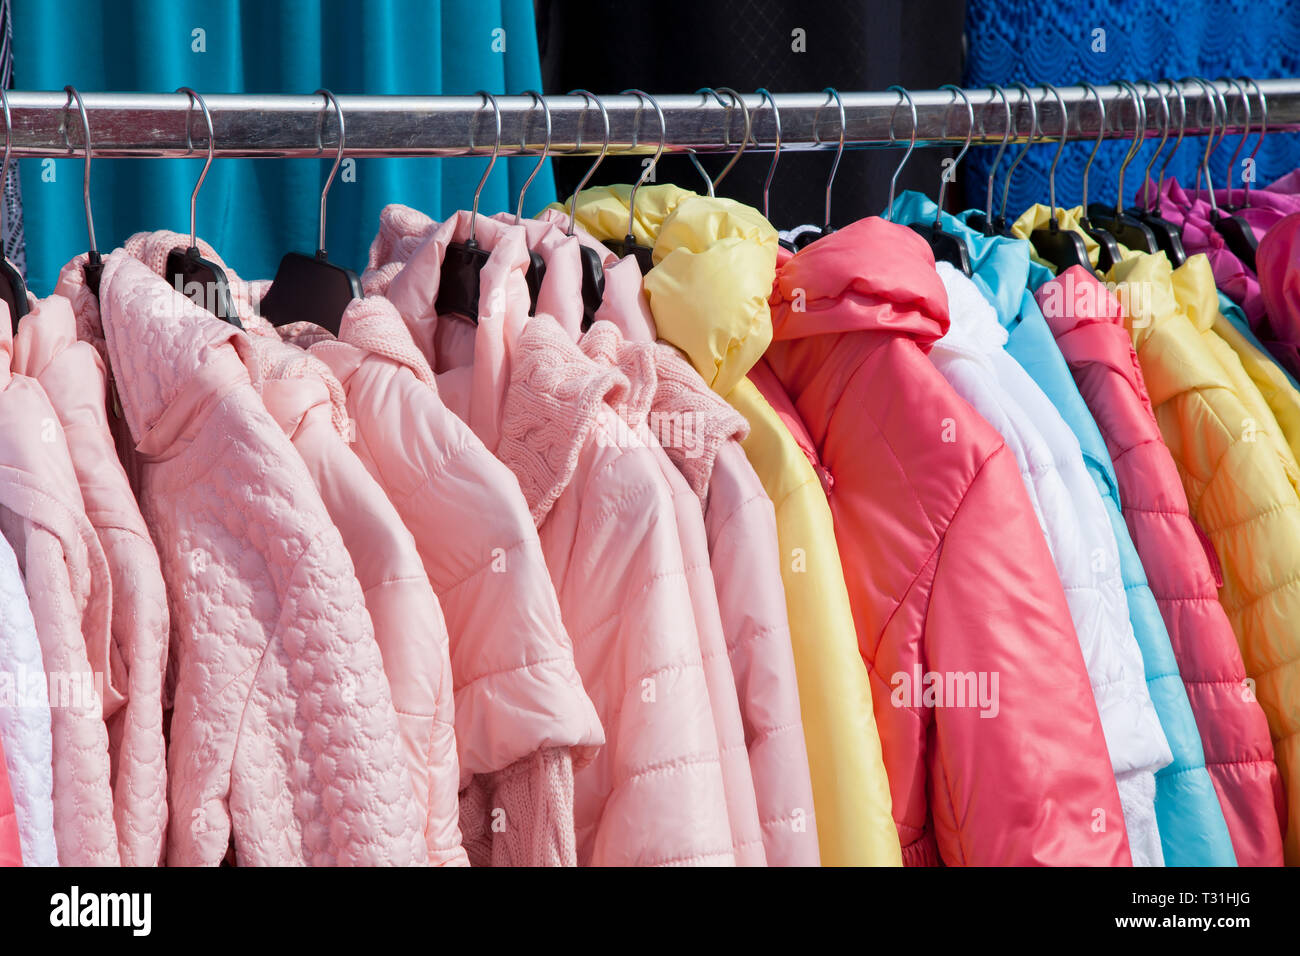 Jackets for sale on hanger. Stock Photo